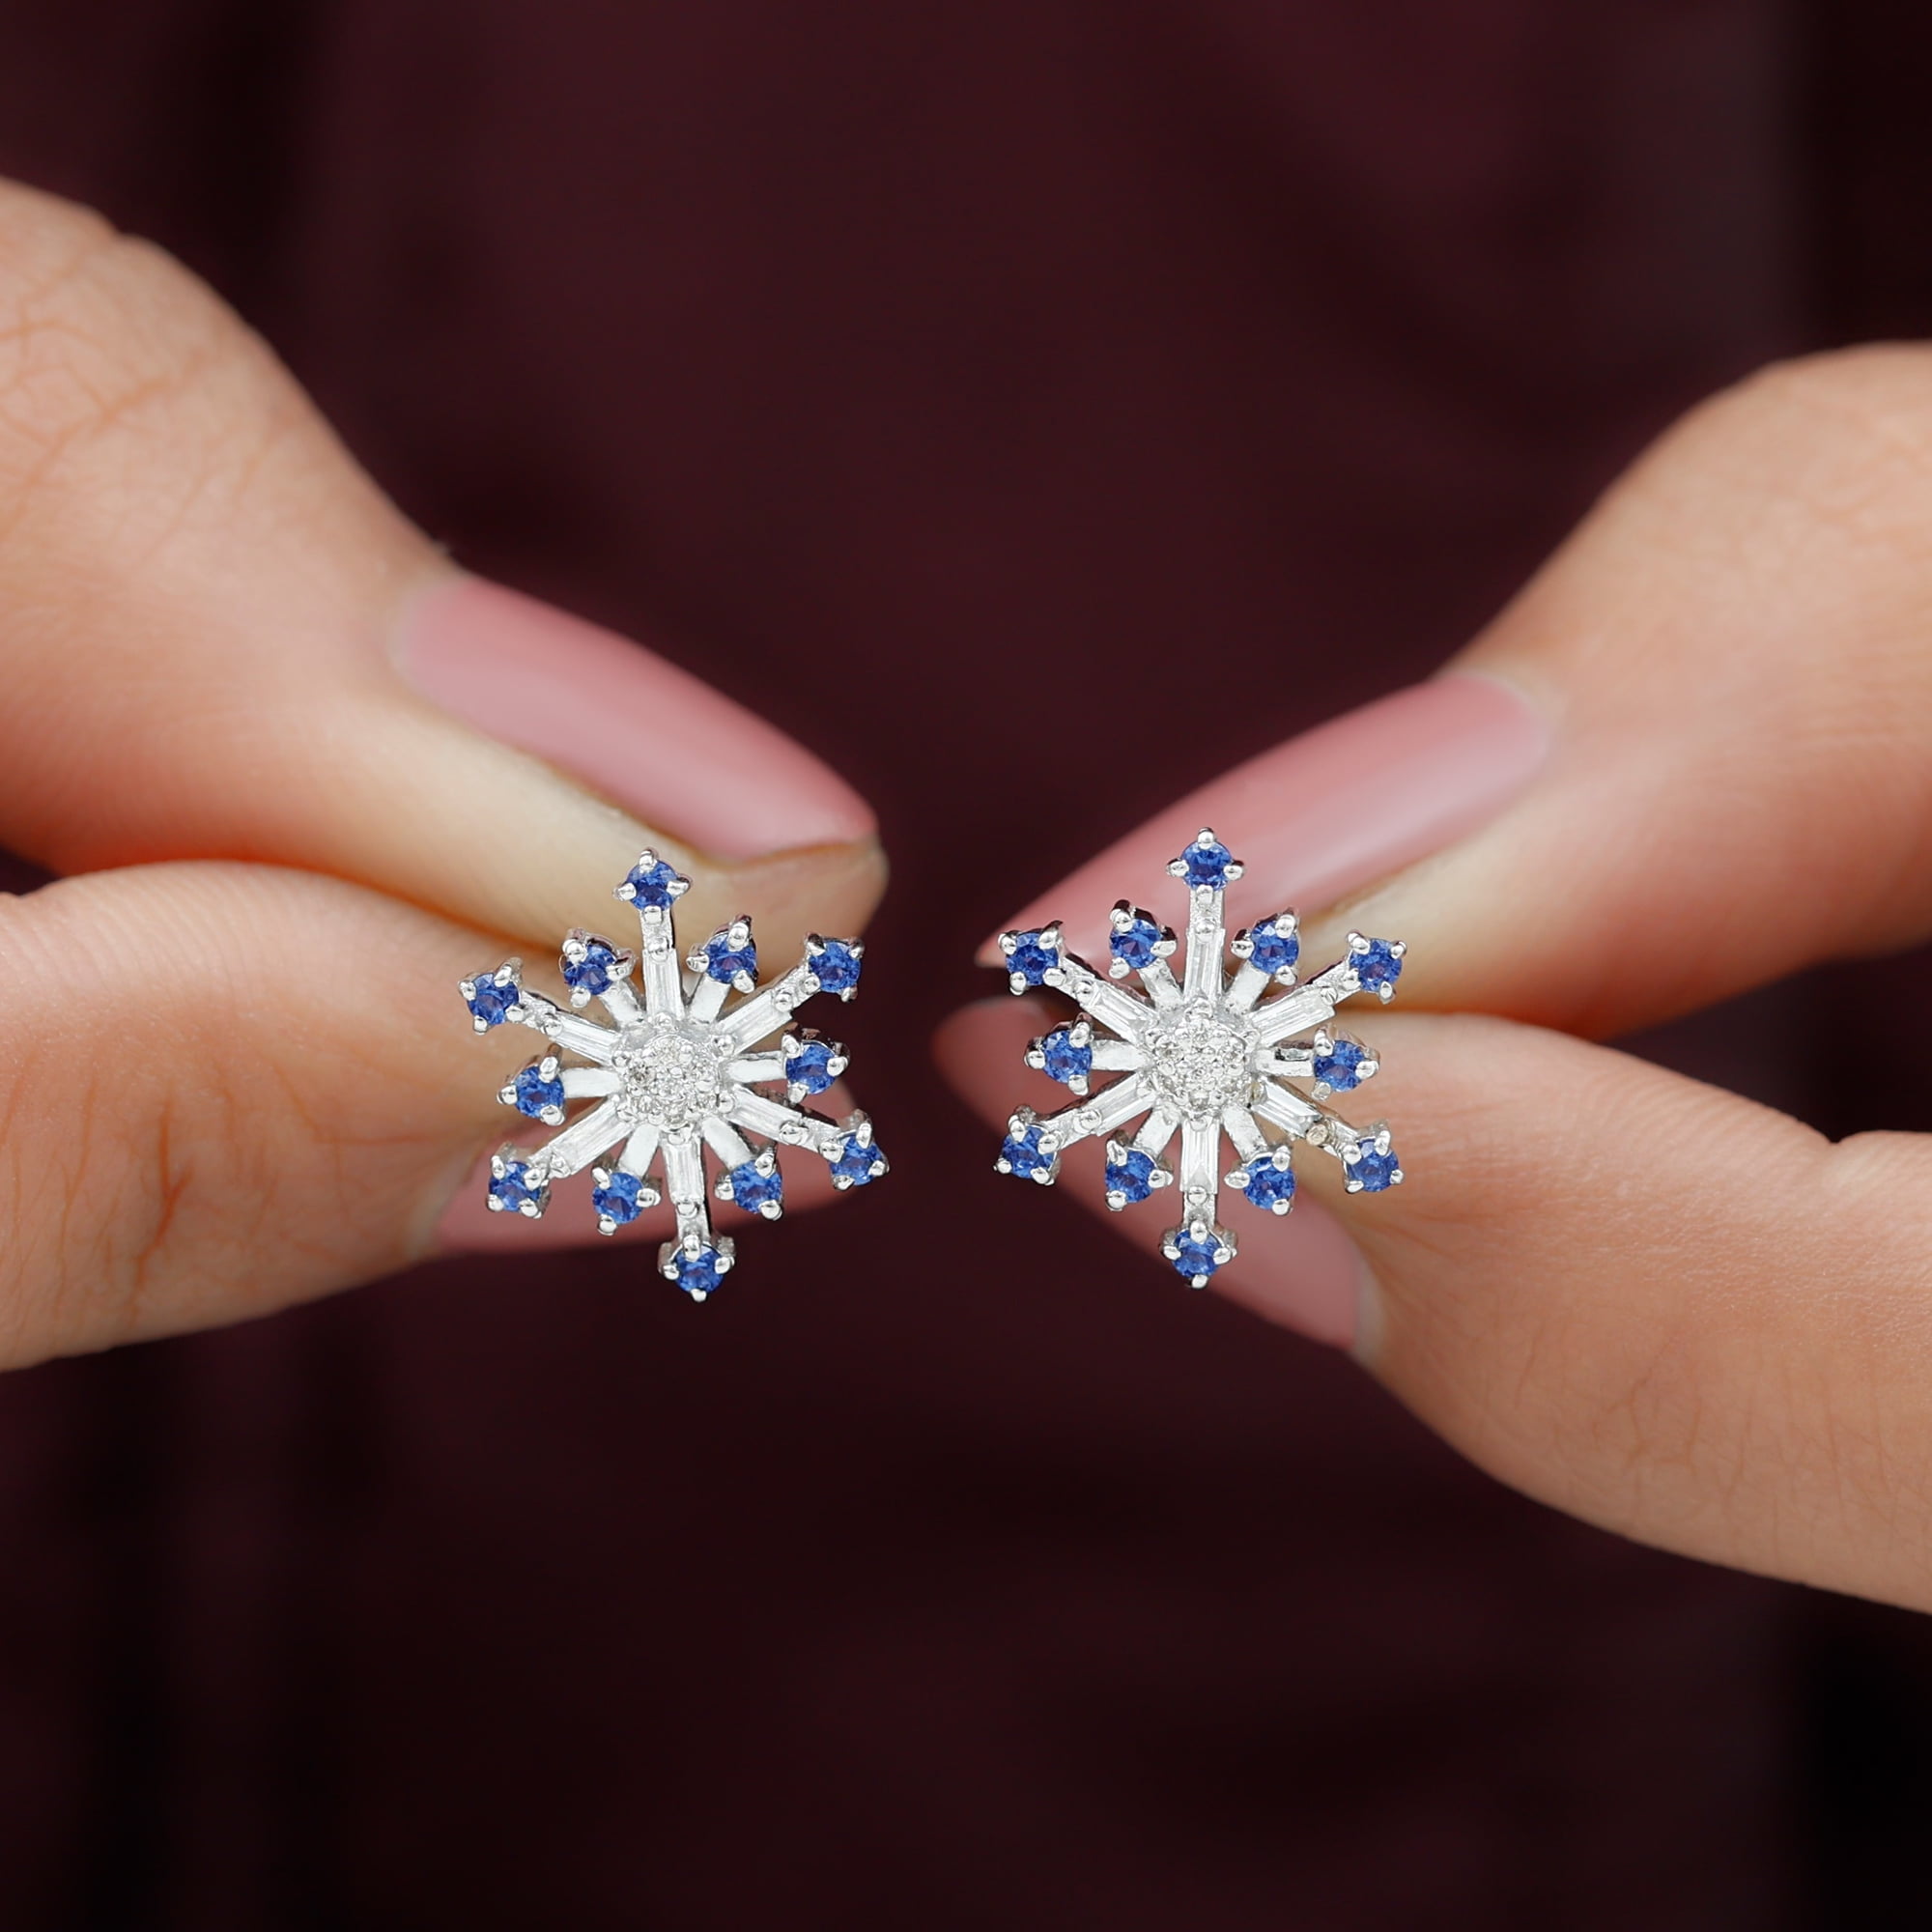 Snowflake Stud Earrings in Stering Silver and White Sapphire - Michelle  Chang